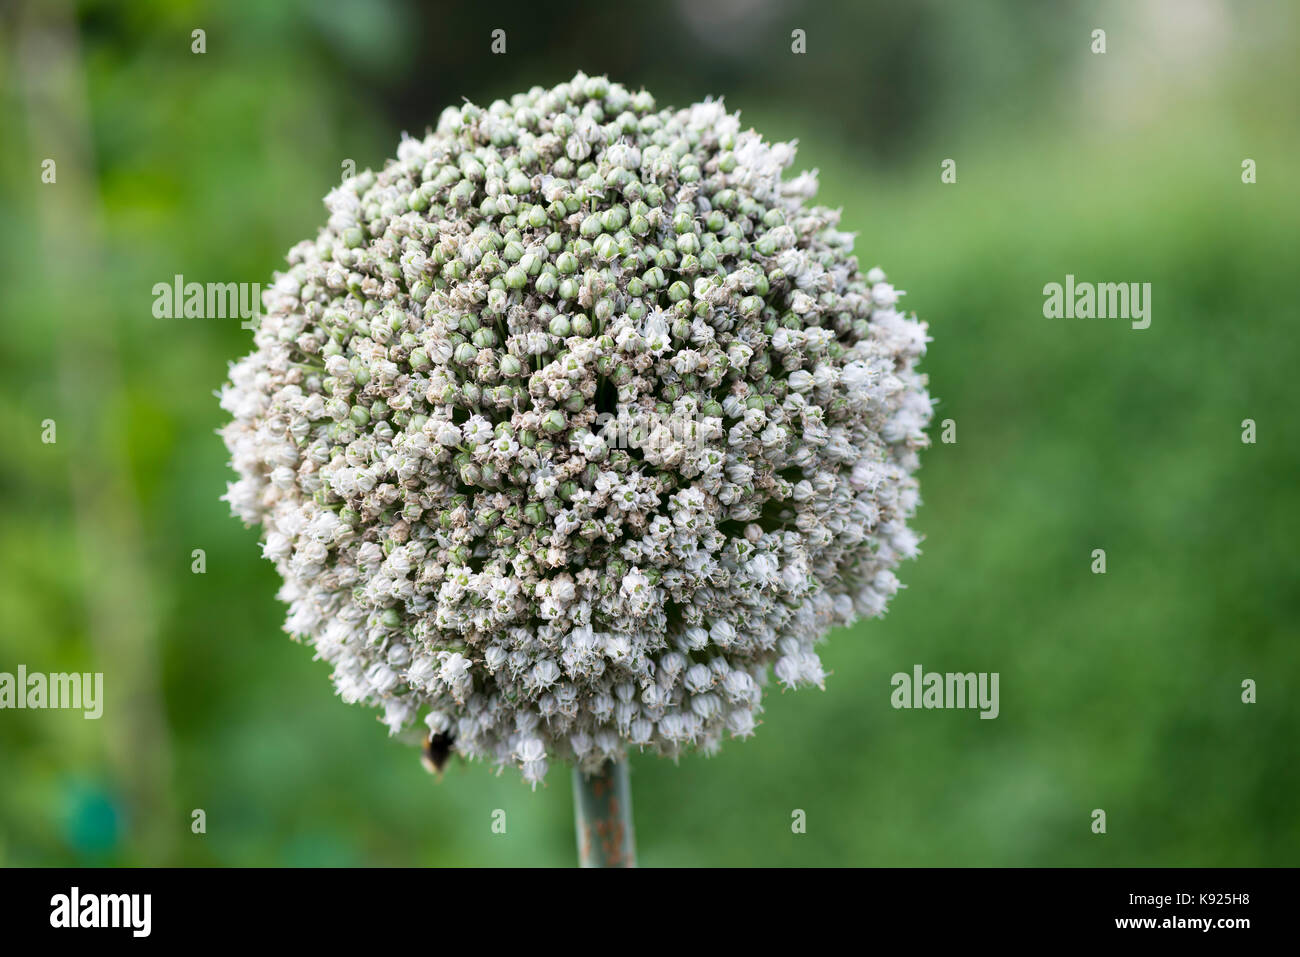 A leek which has been left to bolt and seed, causing a pretty flower head to develop.  Leek - Allium ampeloprasum var. porrum (L.) Stock Photo